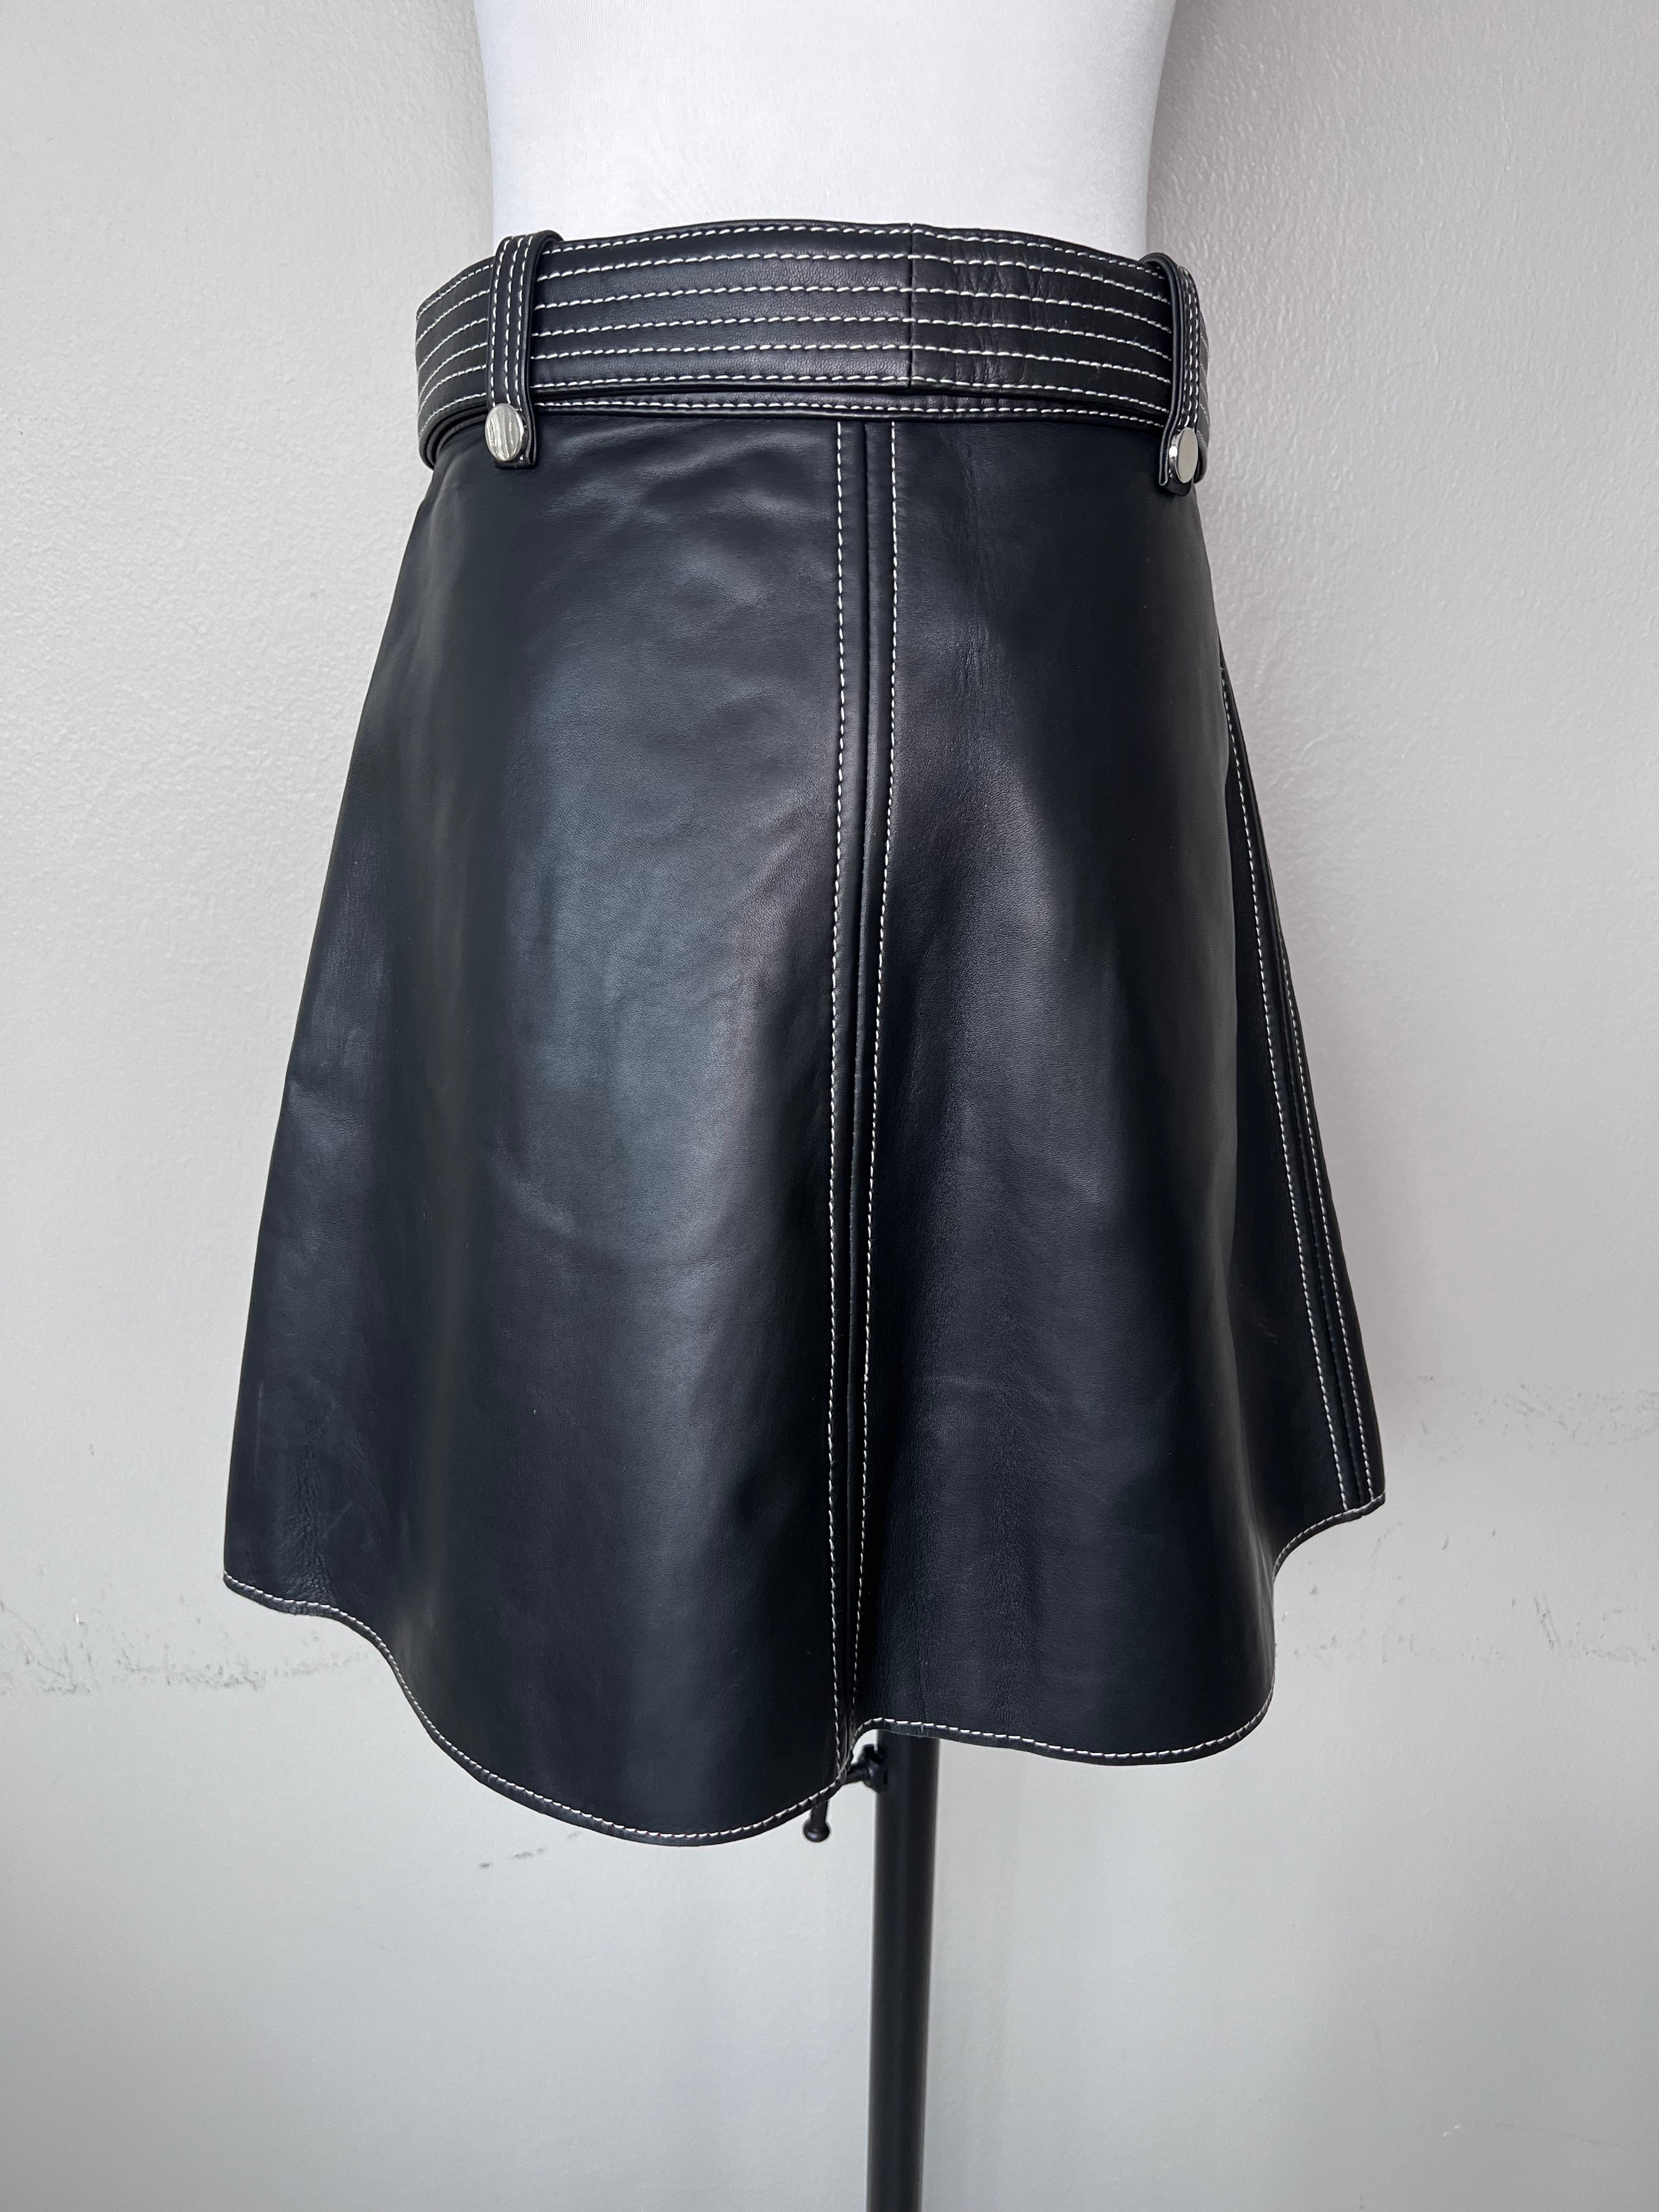 Black a-line short leather skirt with zipper down the middle and matching belt with white stitching detail. - MAJE